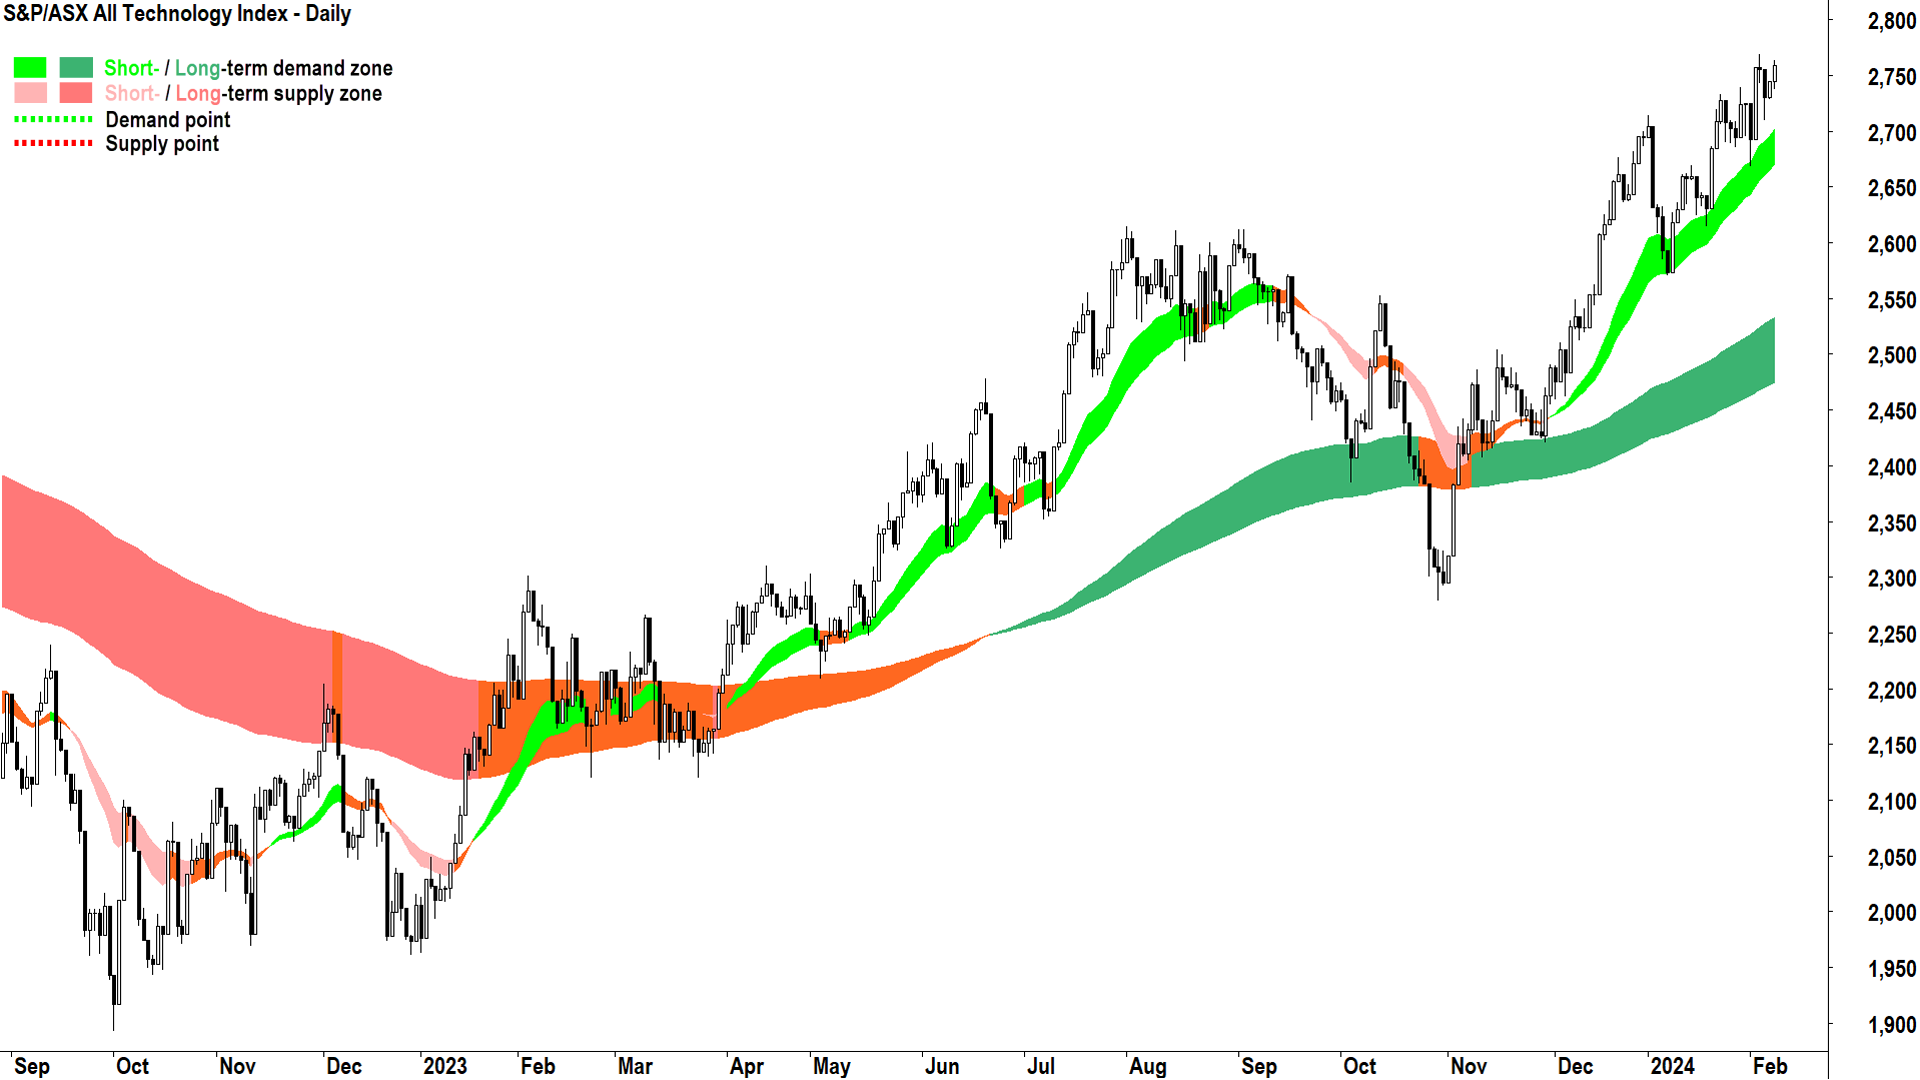 The S&P/ASX All Technology Index (XTX) has been one of the best performing sectors this year